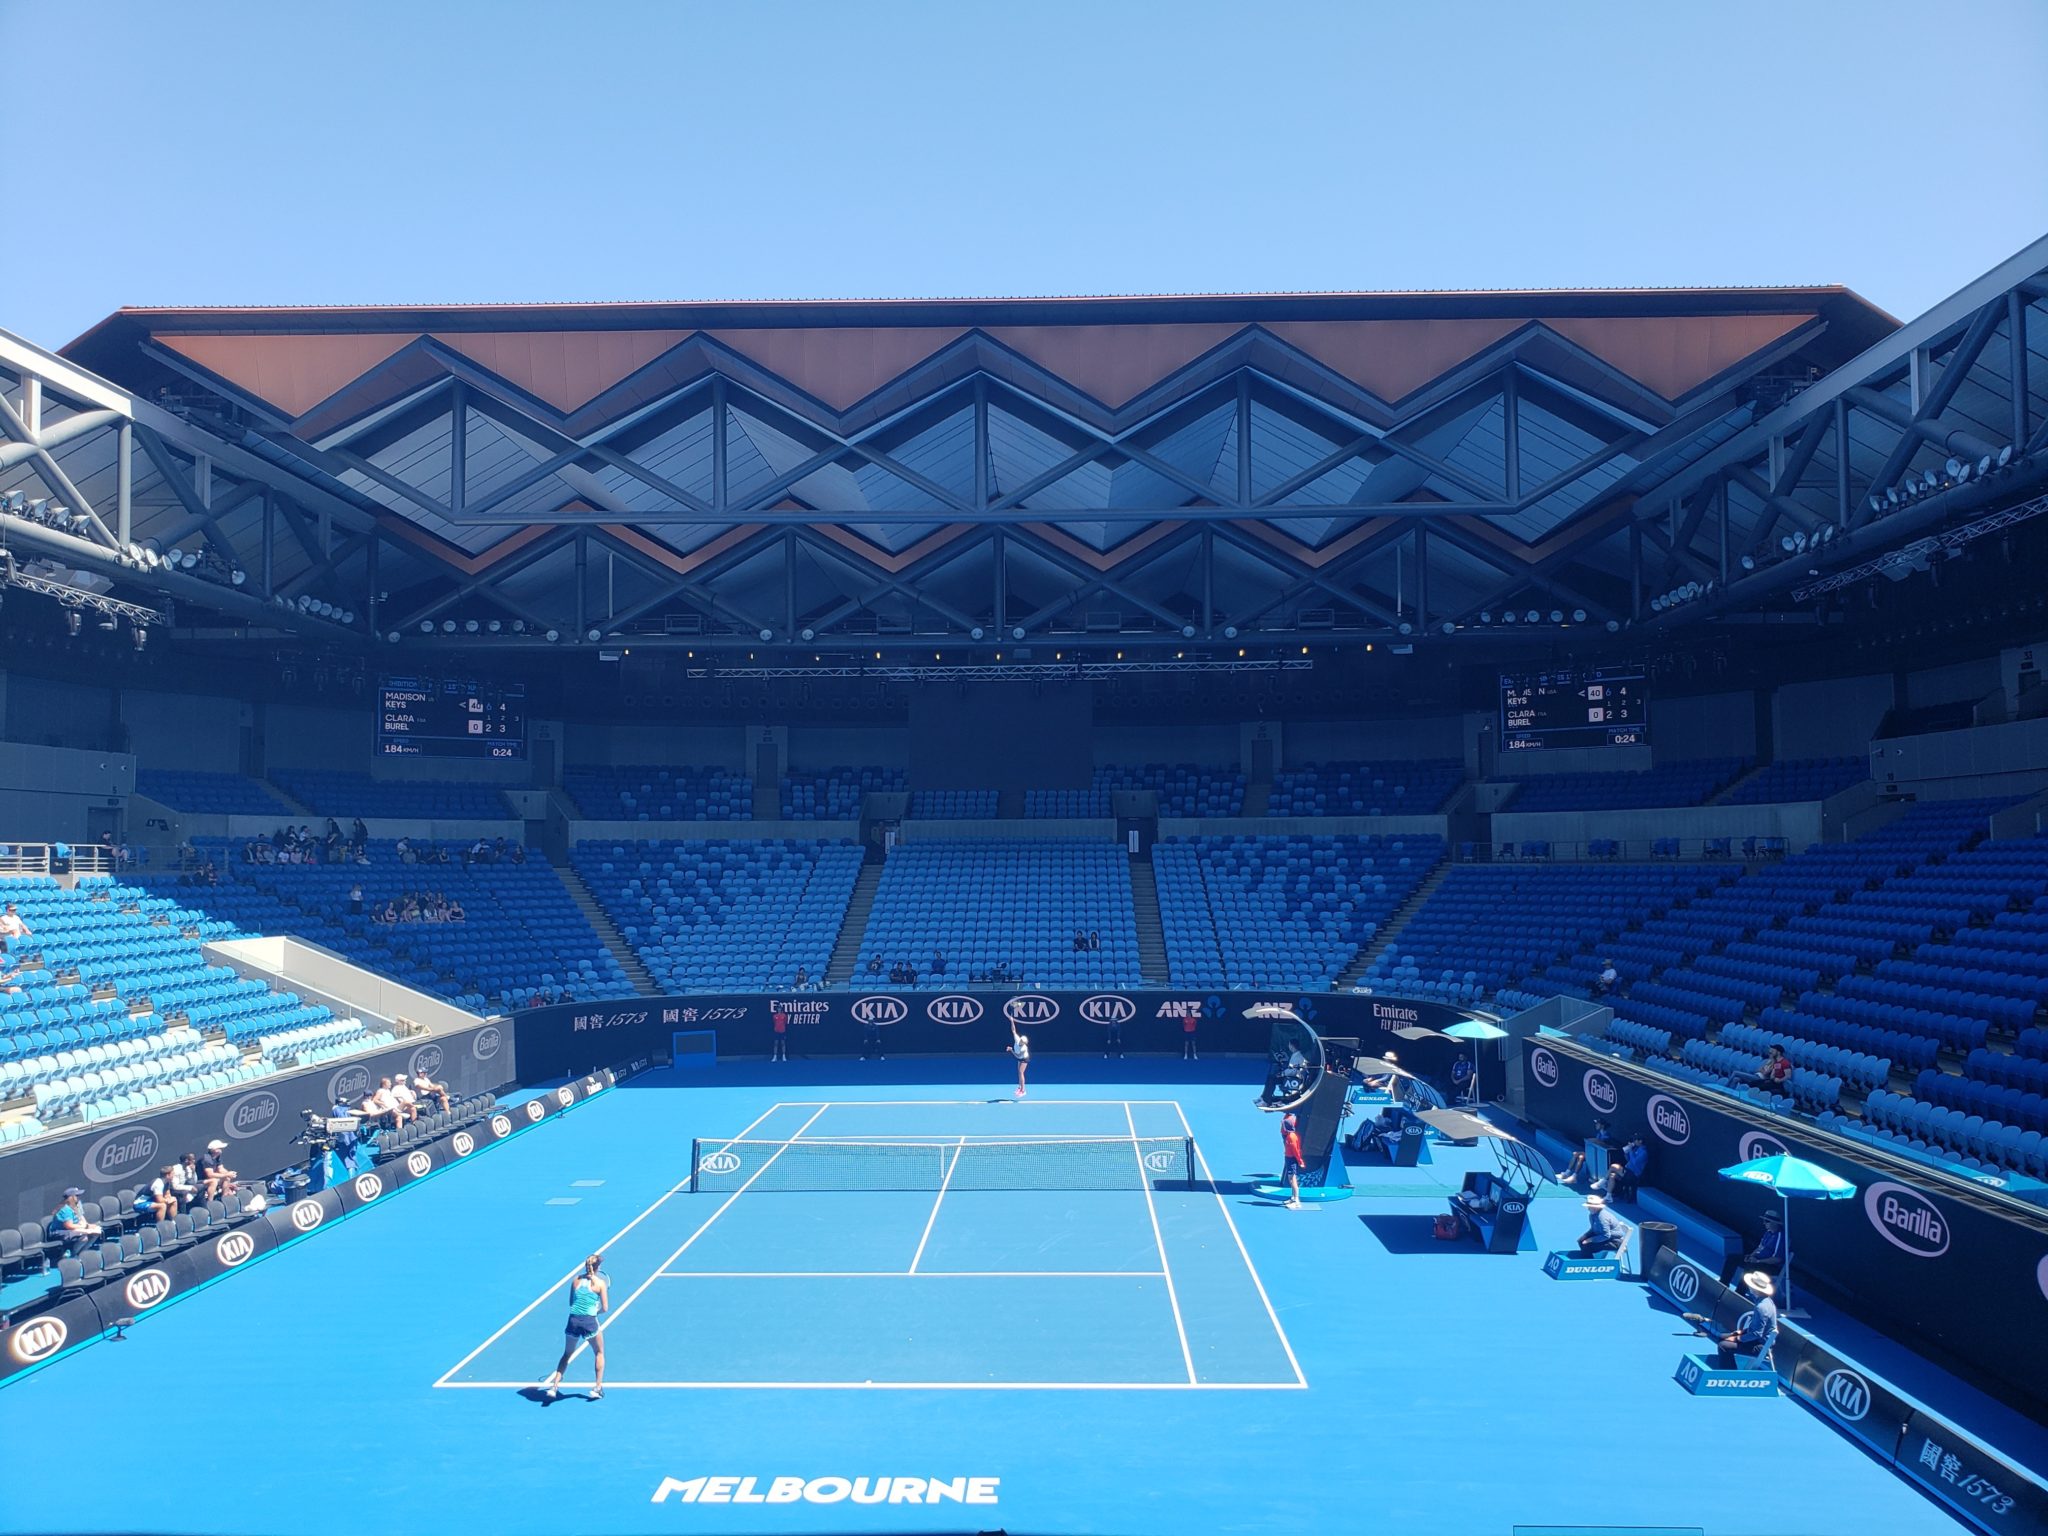 a tennis court with blue seats and blue roof